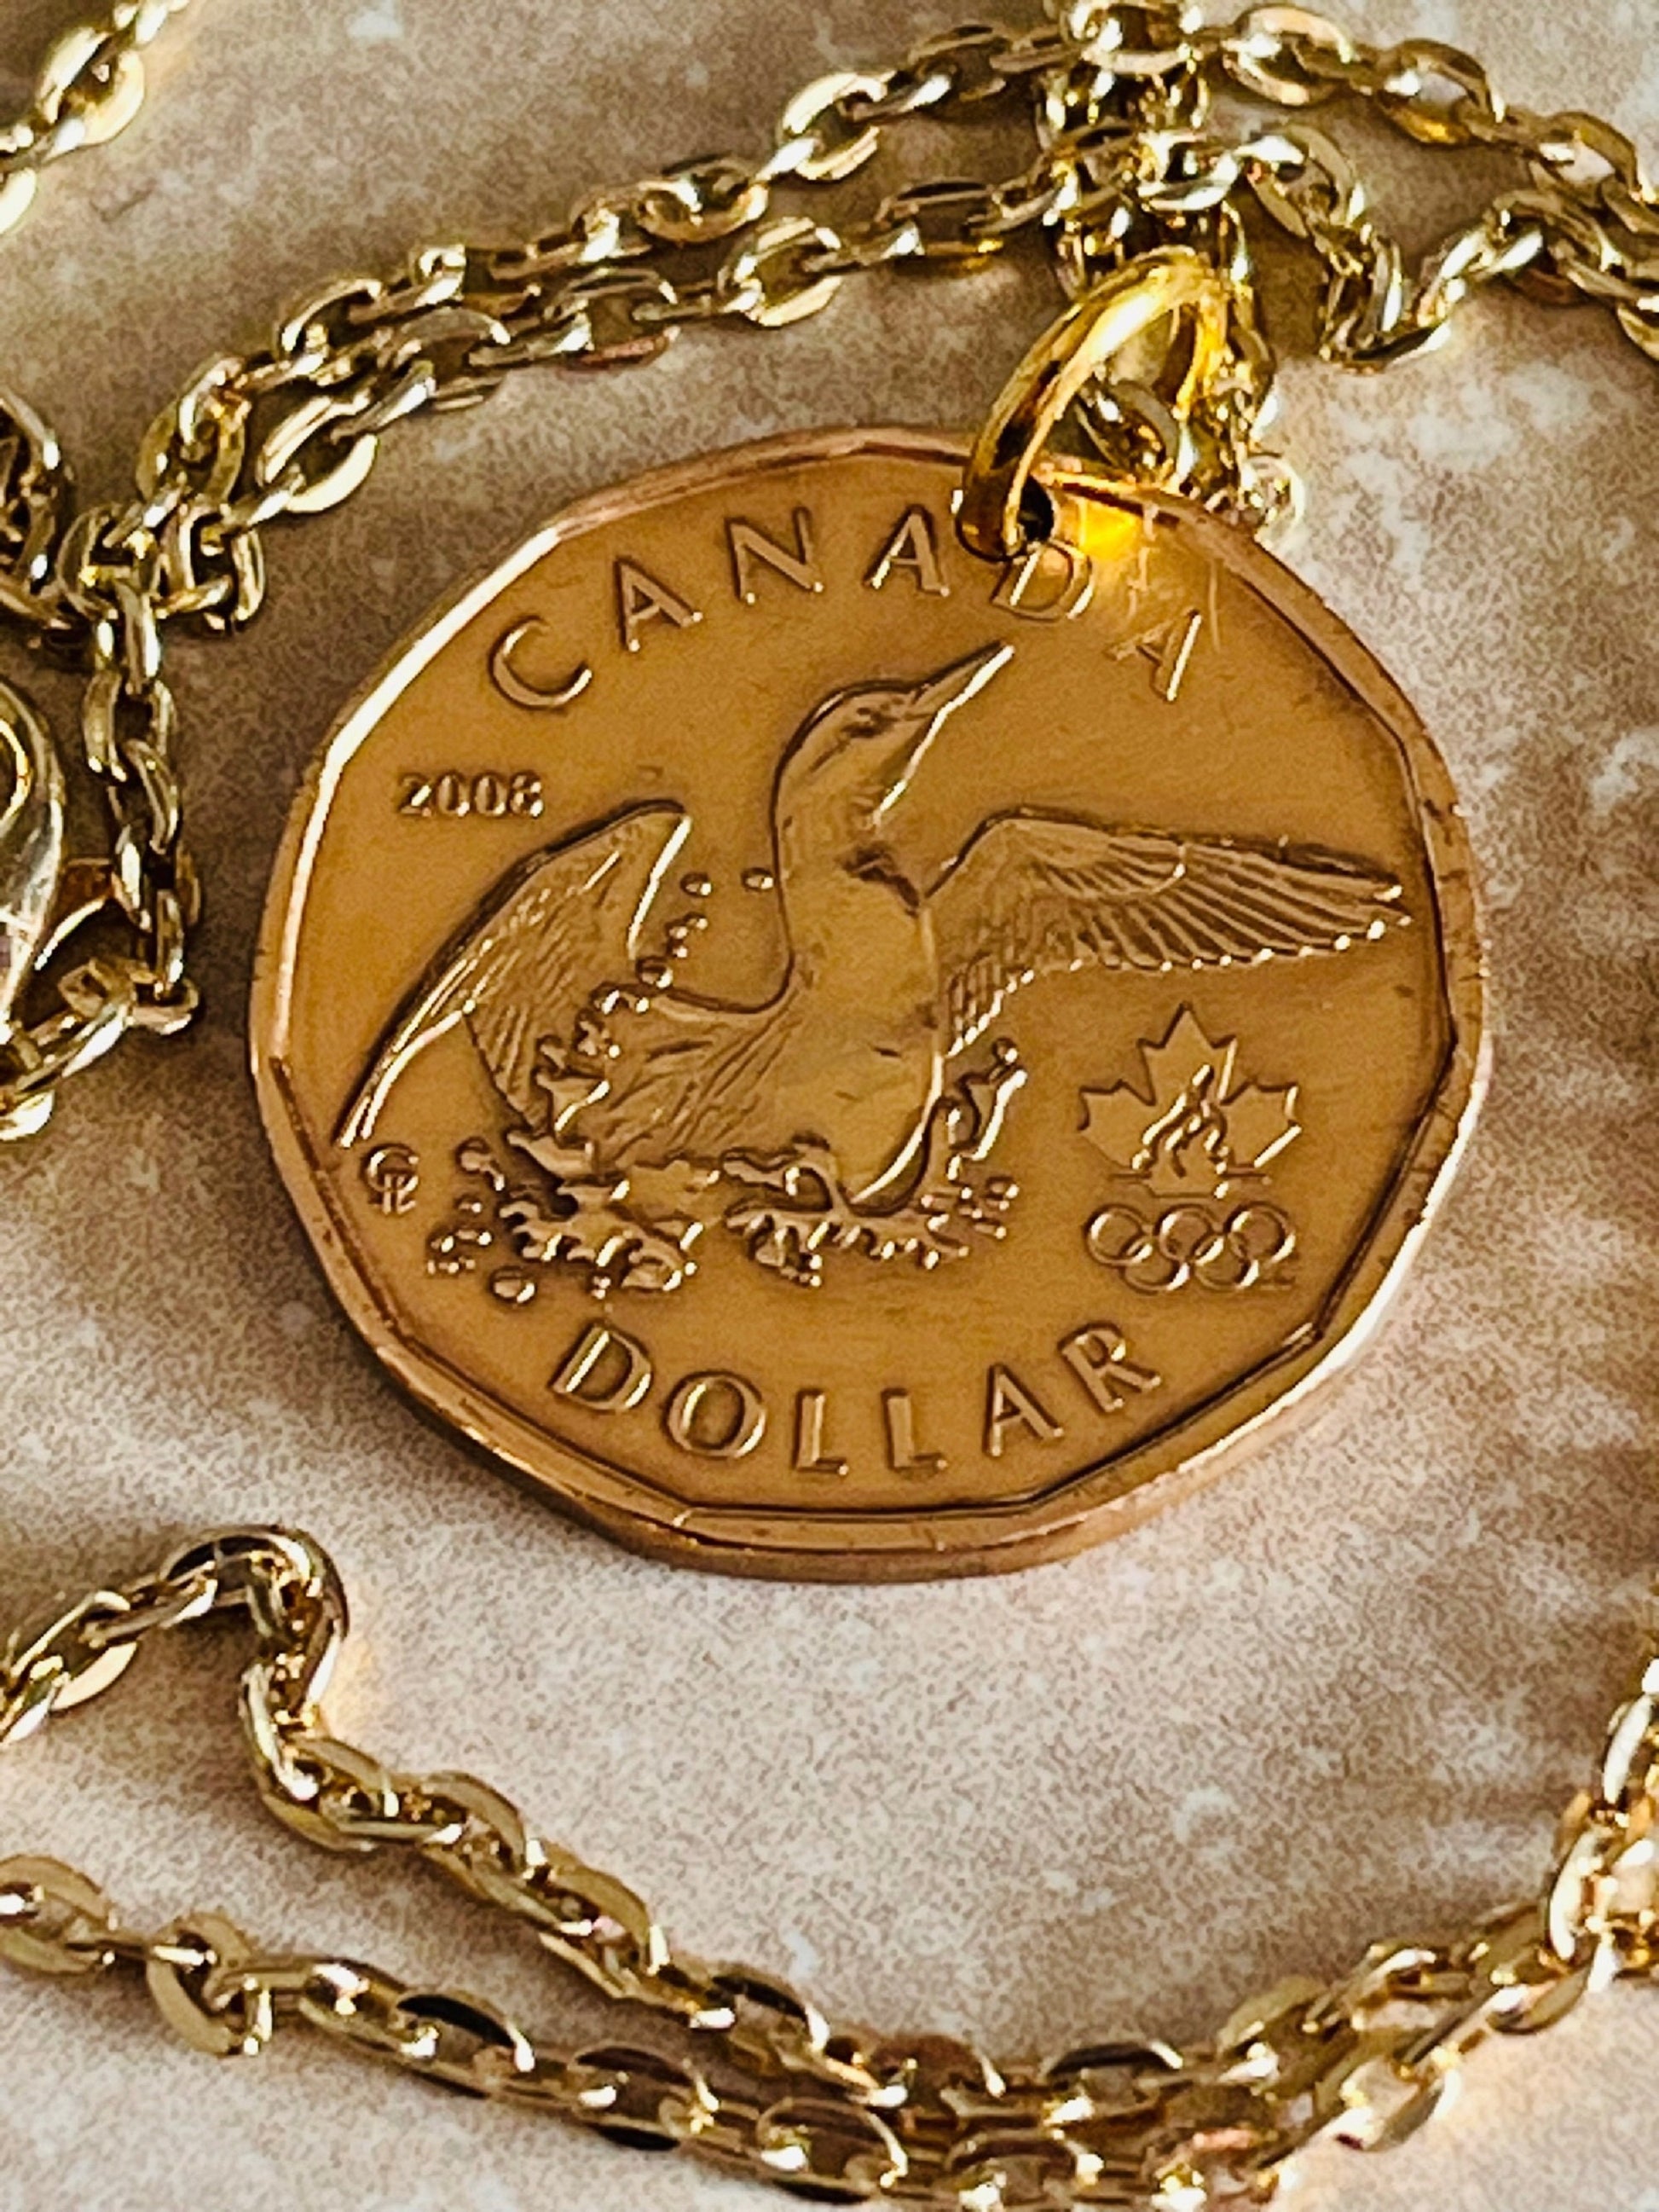 Canada Coin Necklace Pendant 2008 Flying Loon Dollar Loonie Personal Handmade Jewelry Gift Friend Charm For Him Her World Coin Collector